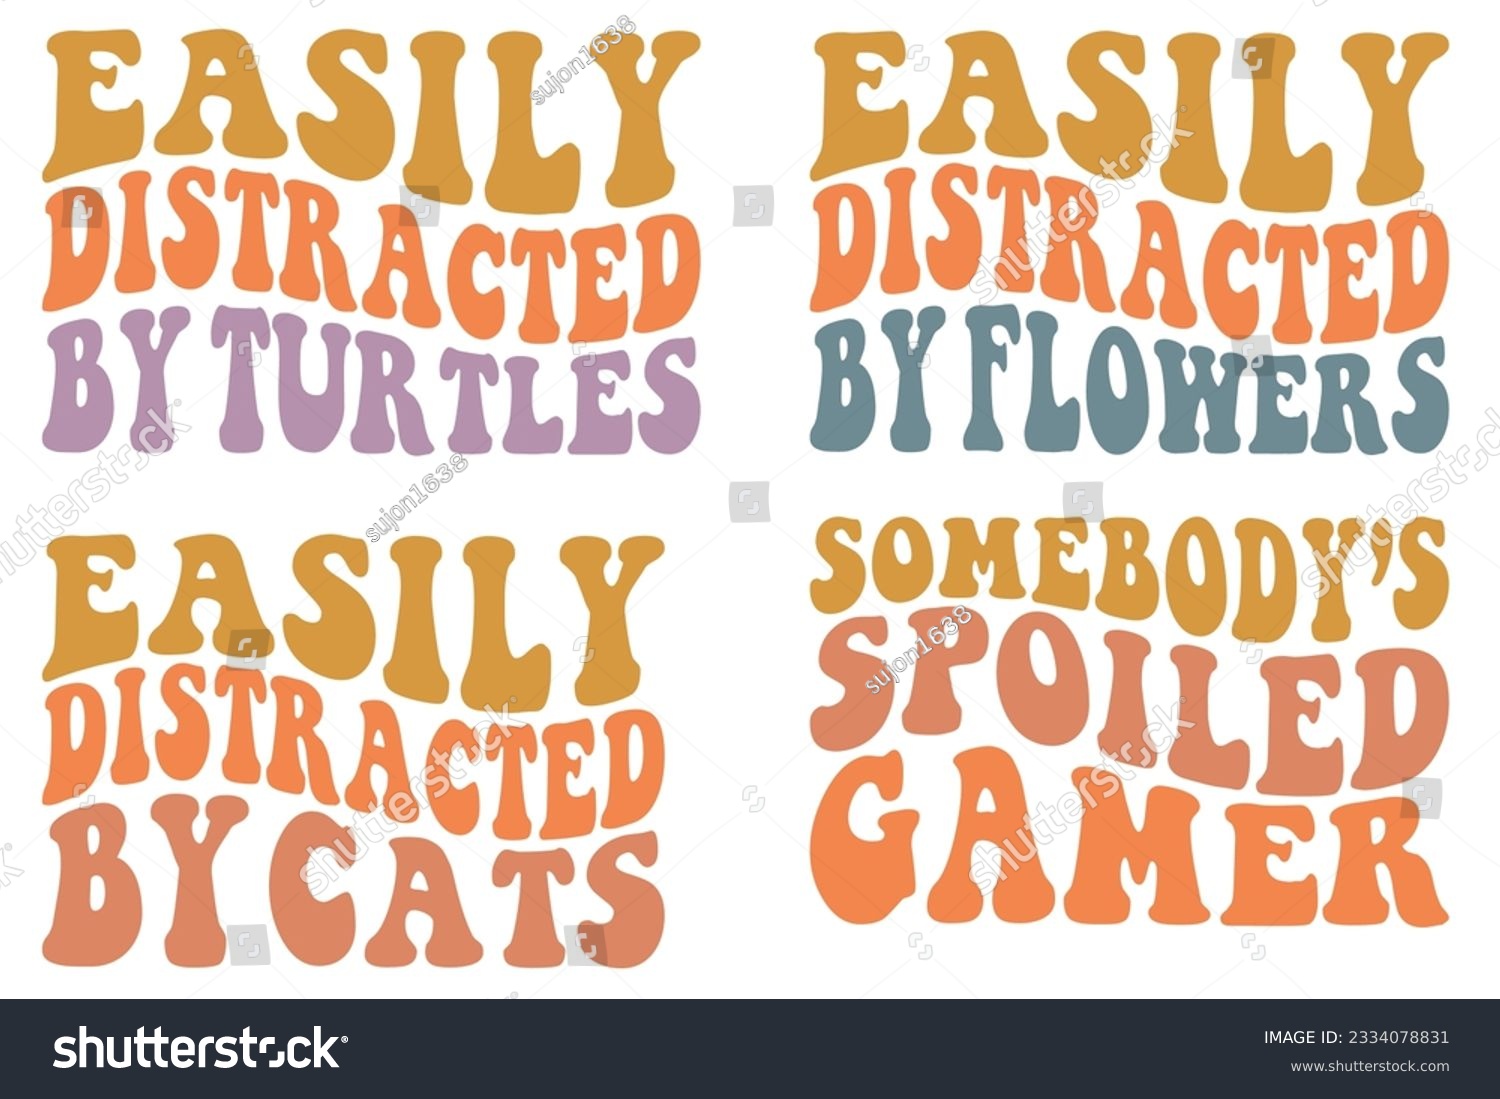 SVG of Easily Distracted by Turtles, Easily Distracted by flowers, Easily Distracted by cats, somebody's spoiled gamer retro wavy SVG bundle T-shirt designs svg